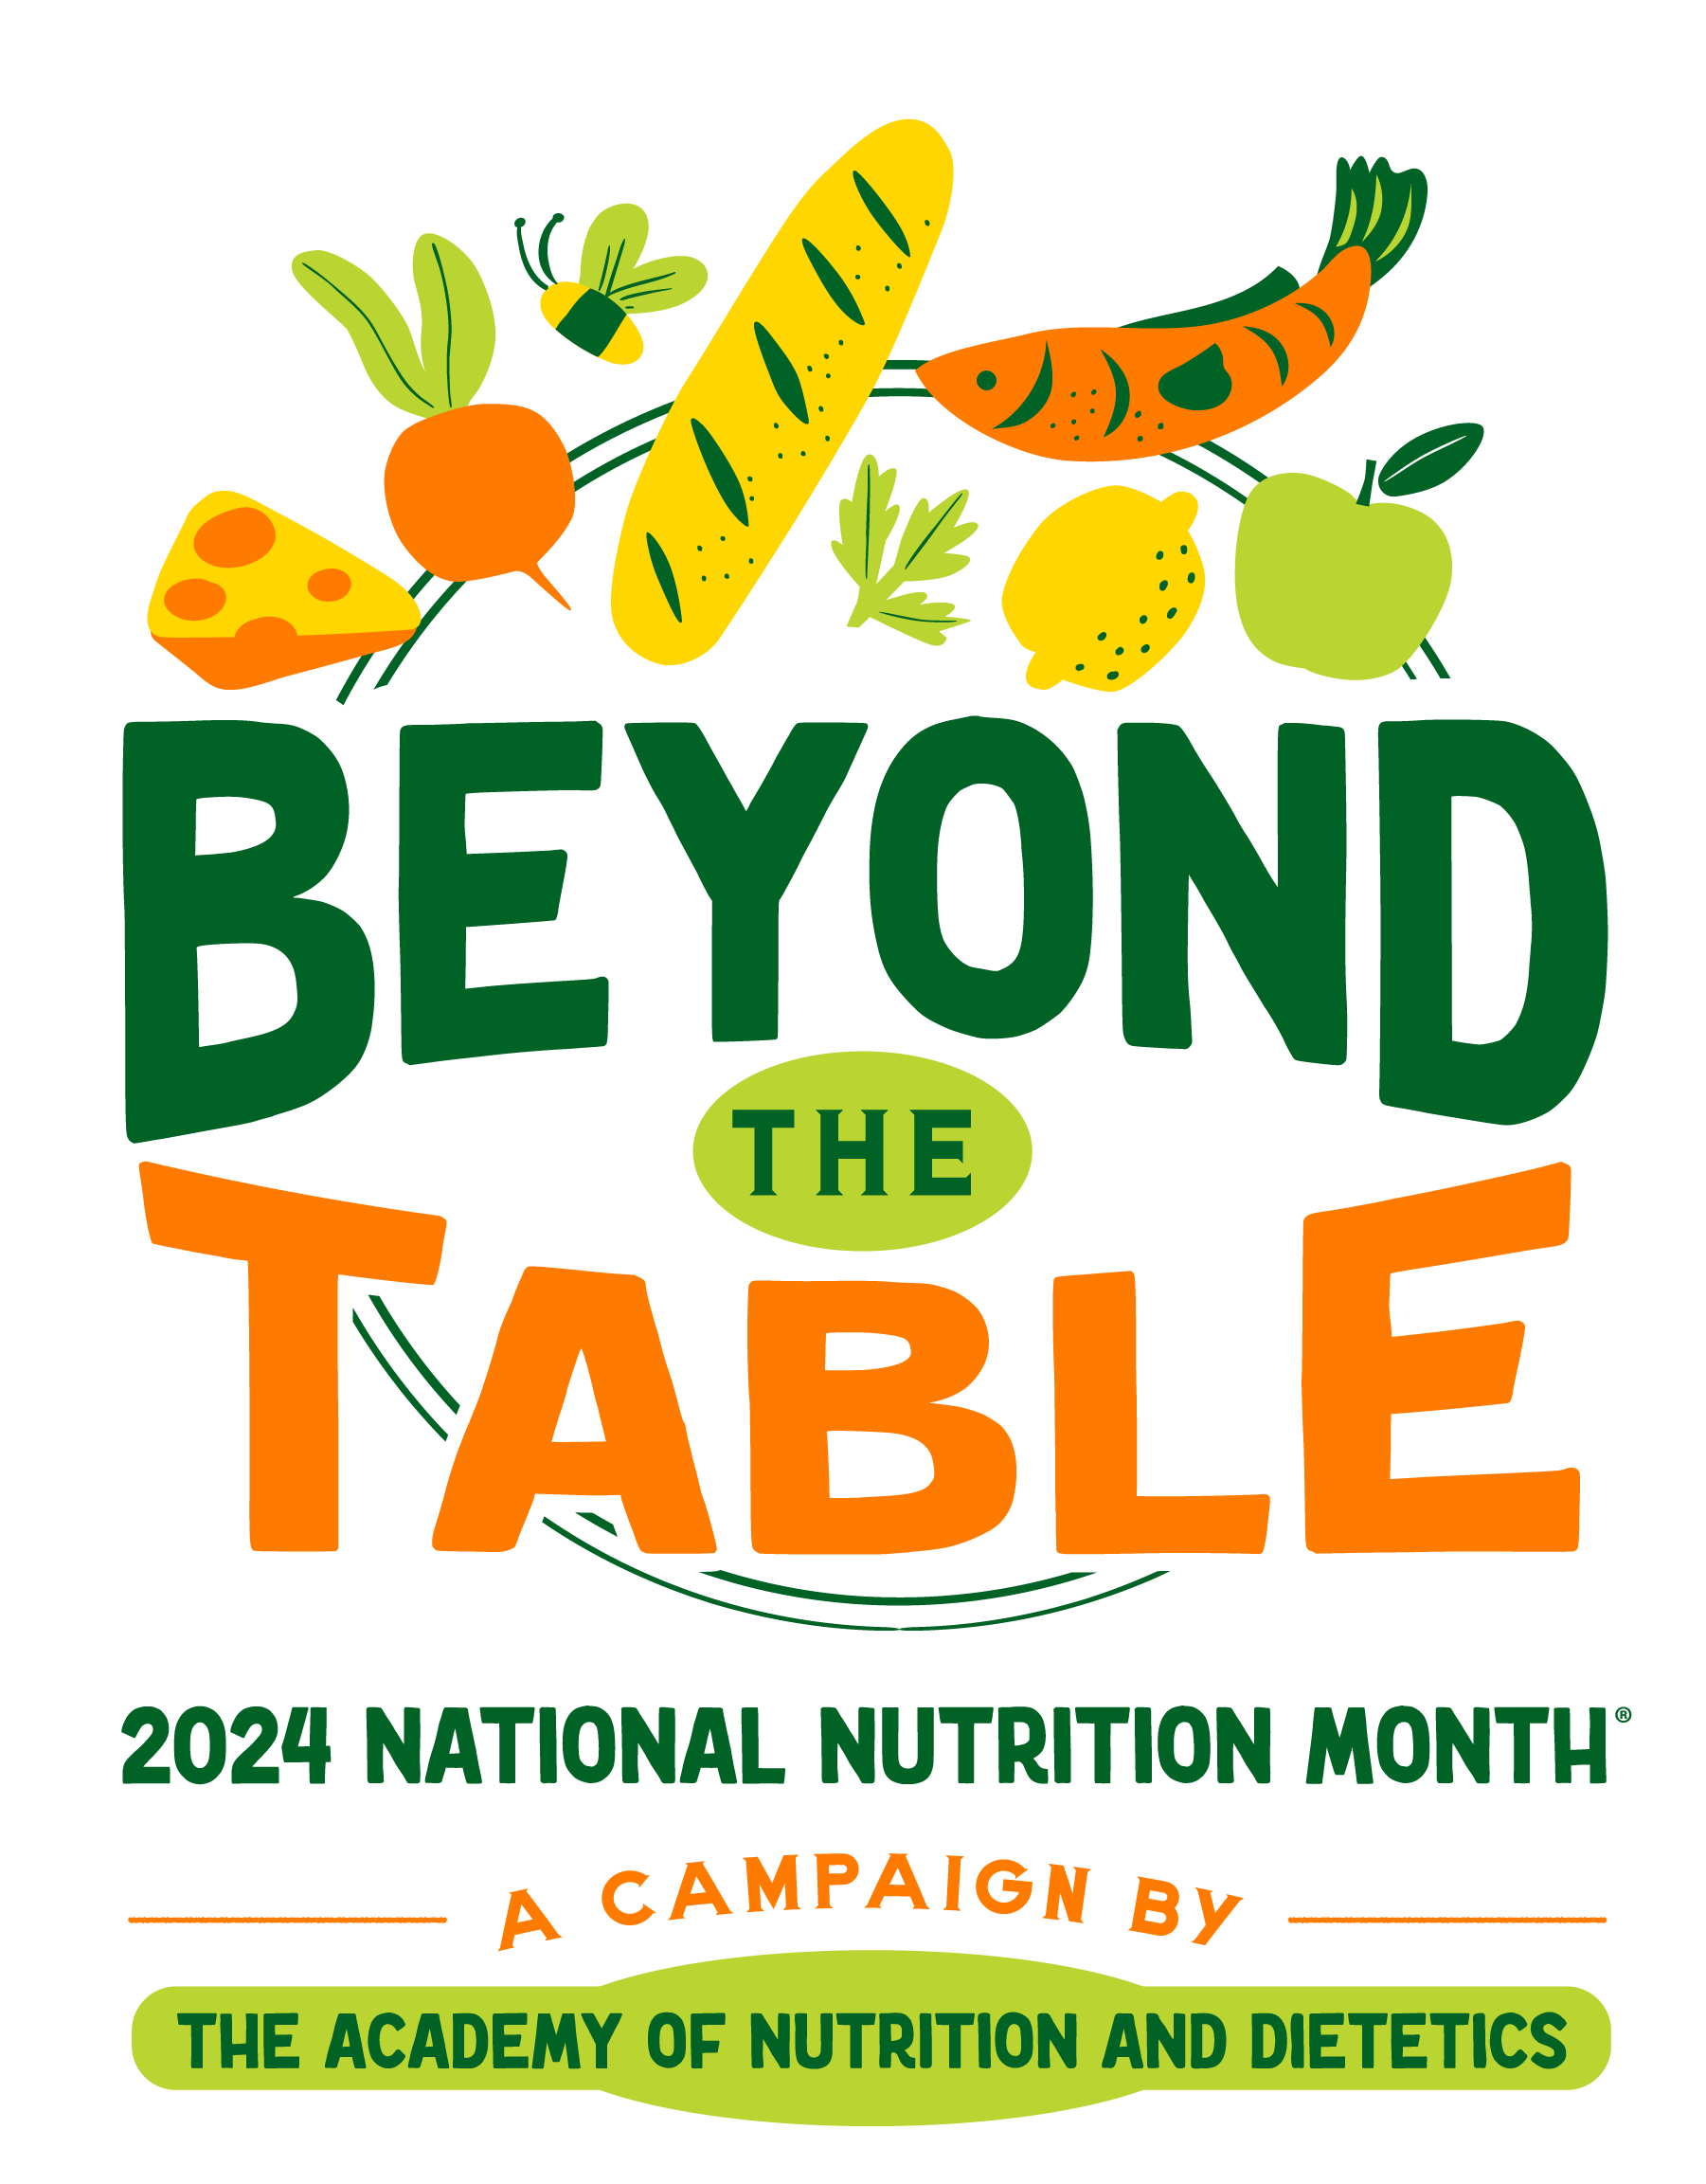 National Nutrition Month 2024 theme Beyond the Table, a campaign by the Academy of Nutrition and Dietetics